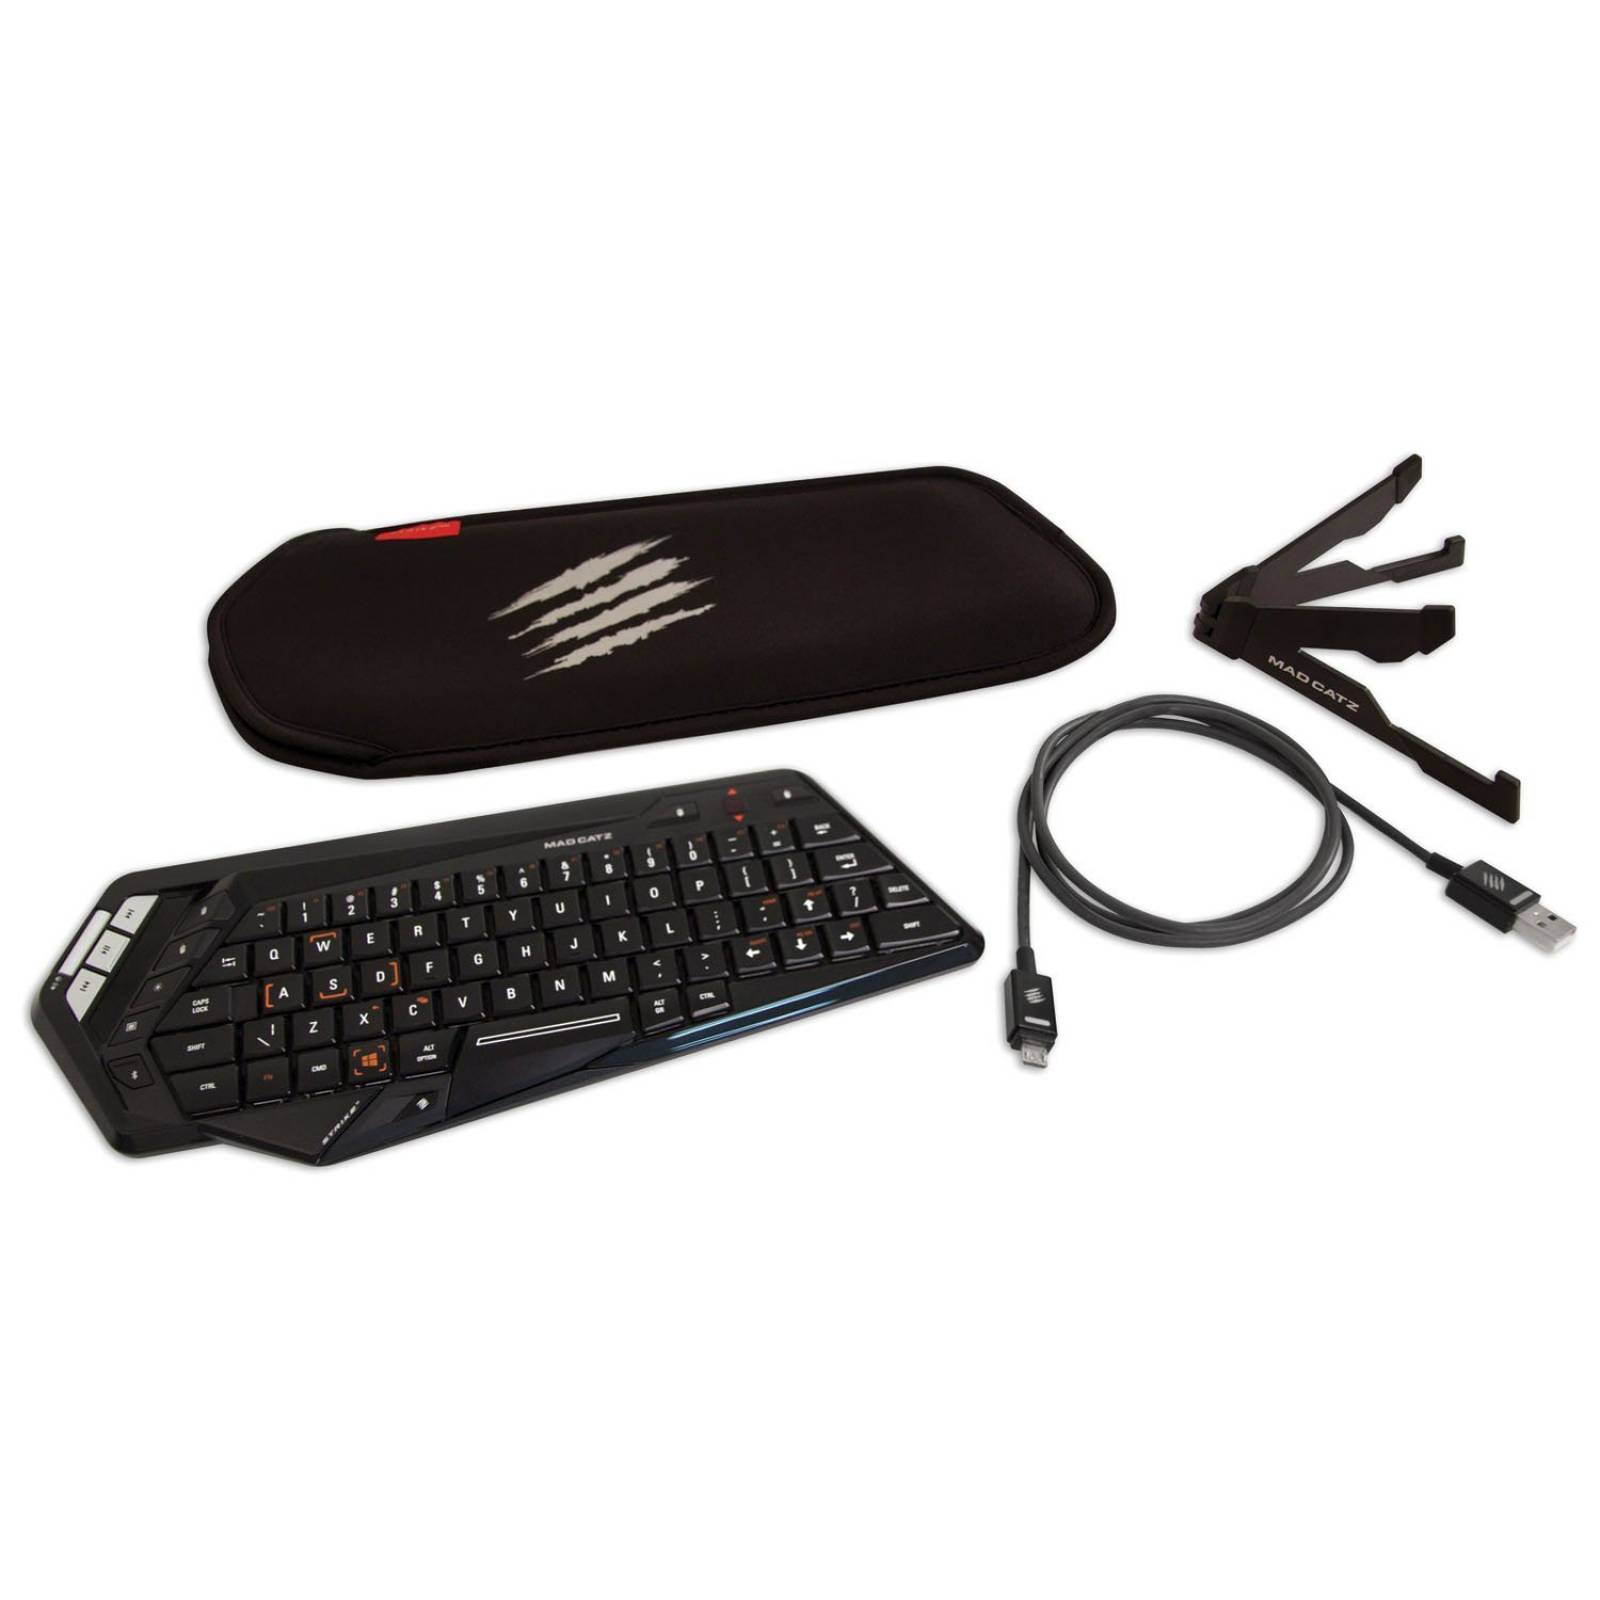 B:Mad Catz S.T.R.I.K.E.M Wireless Keyboard Android y Wi -Negro